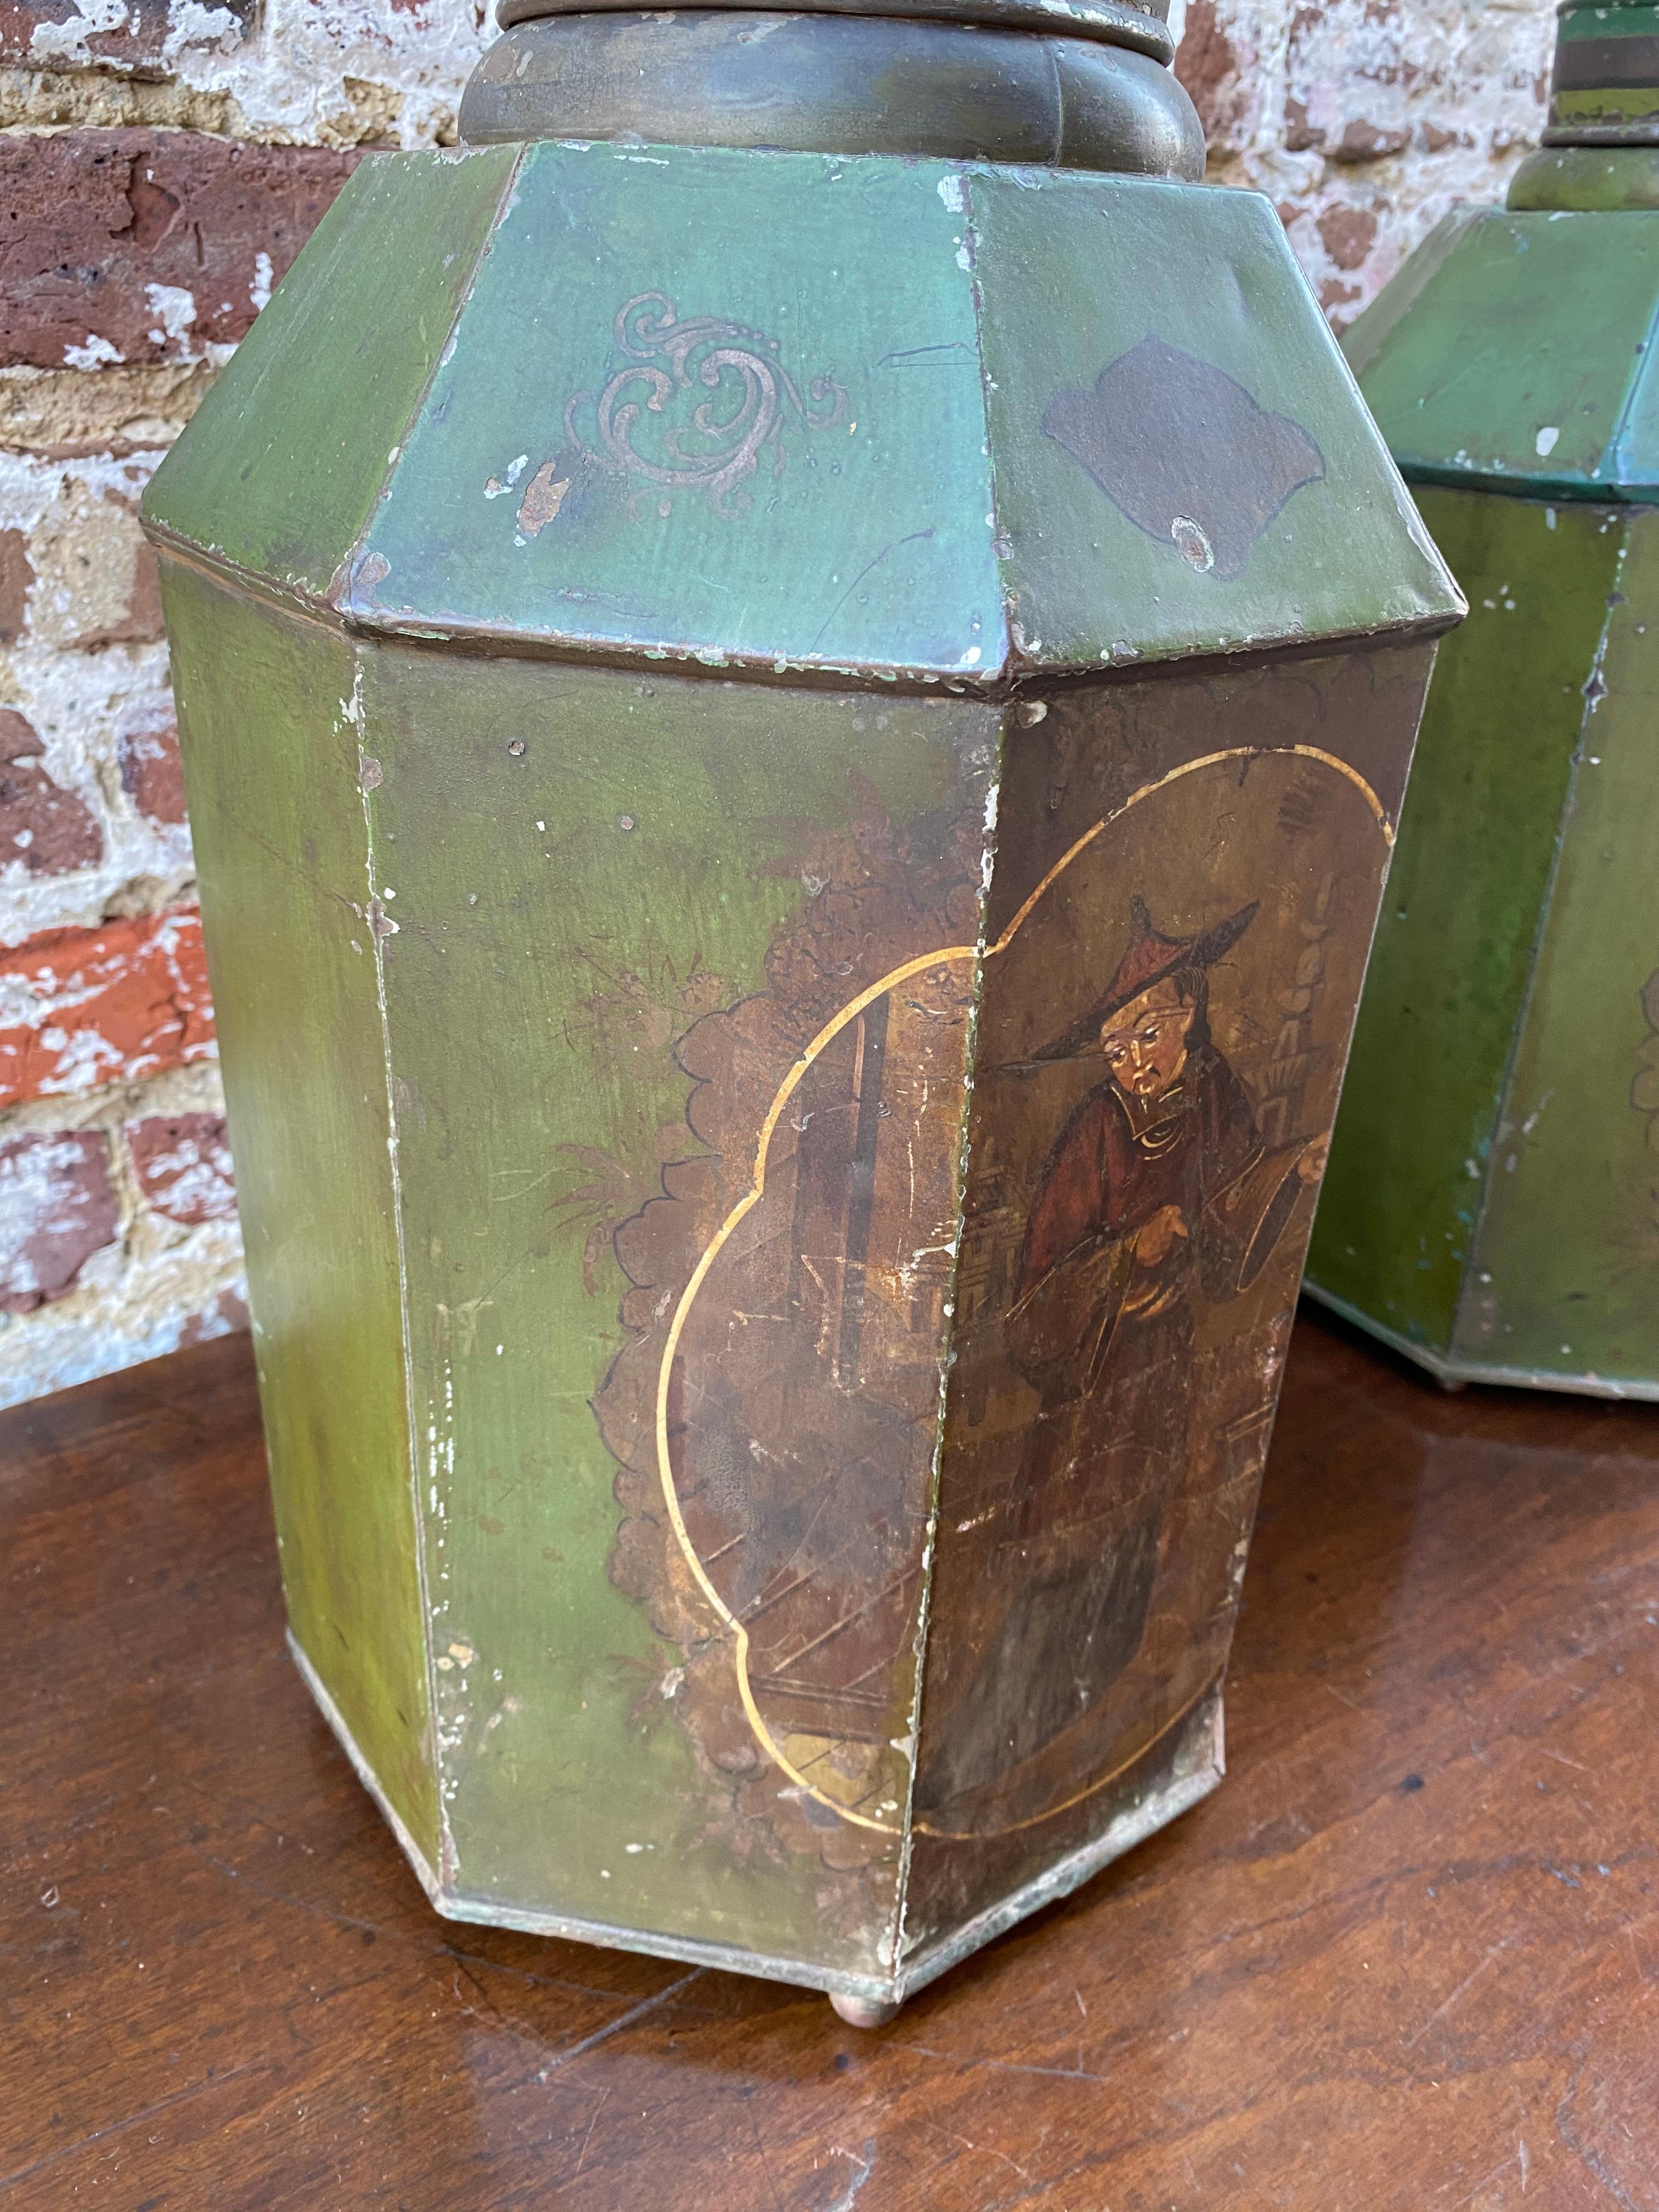 Early 19th century tea bins in original green paint with decorative paint.